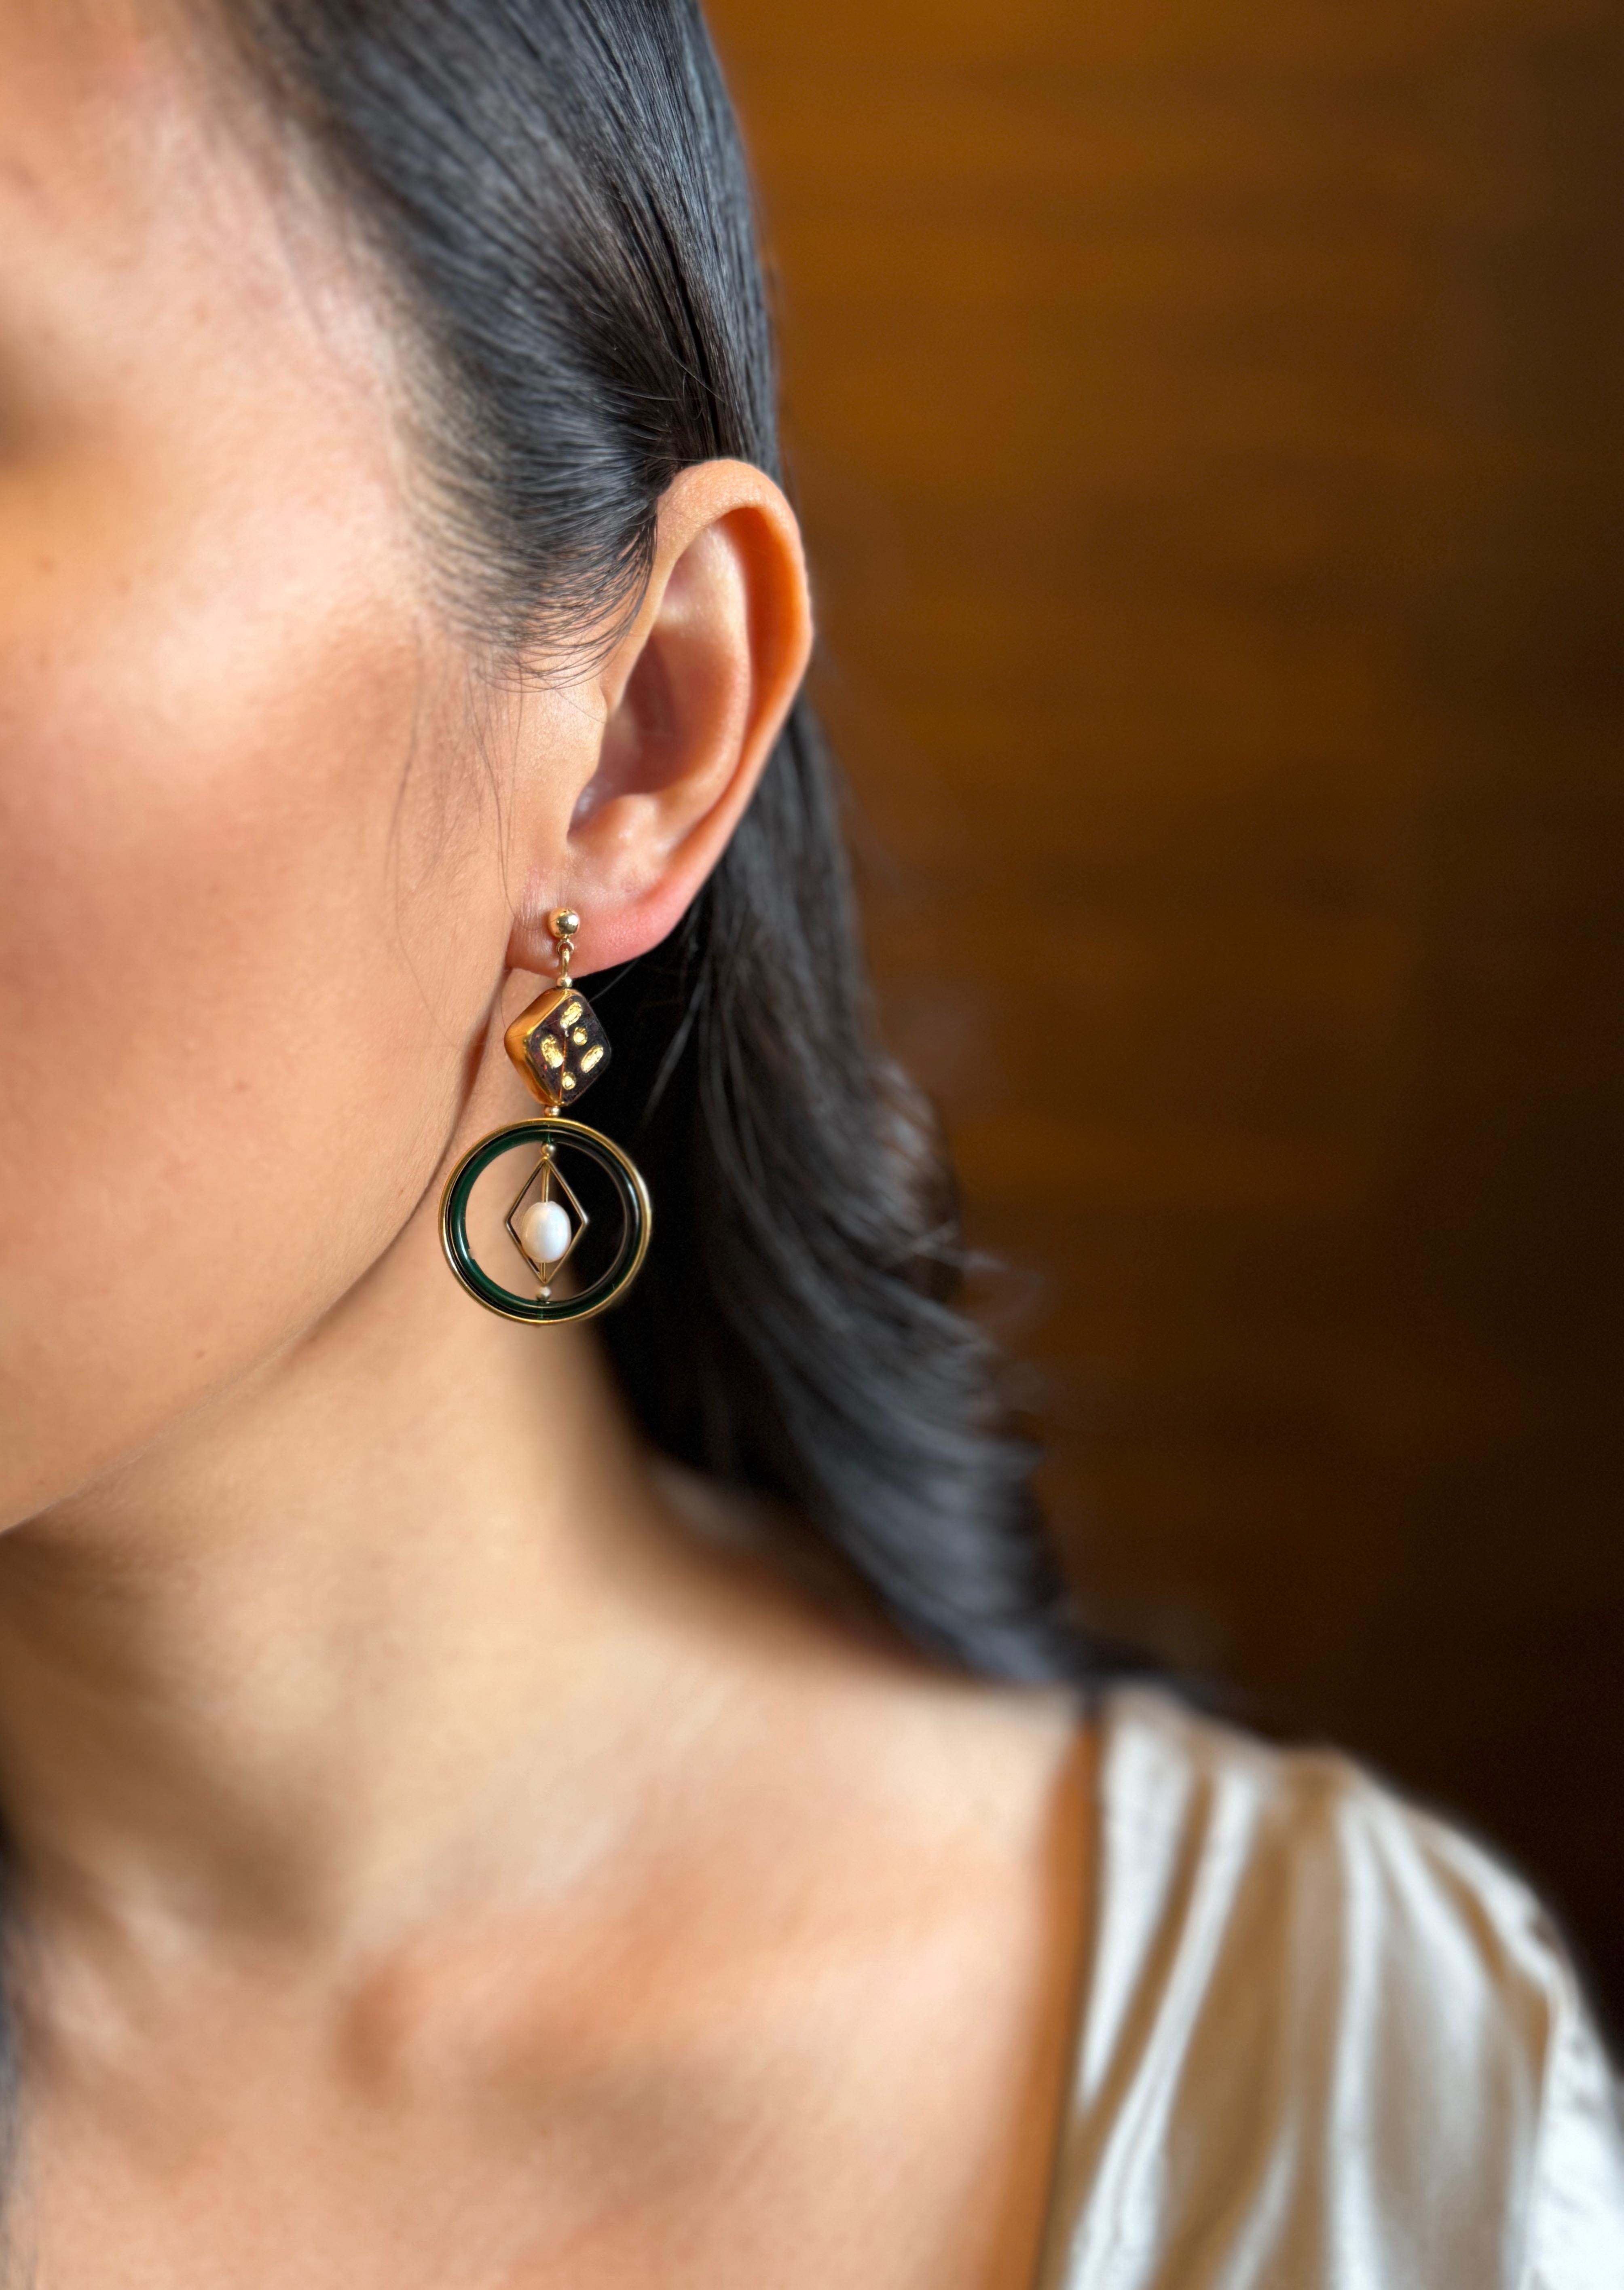 Each earring consist of brown vintage German glass beads edged with gold, vintage lucite, freshwater pearls, brass metal plated with 24K gold, gold-filled findings and ear stud. 

The vintage German glass beads were hand pressed during the 1920s-